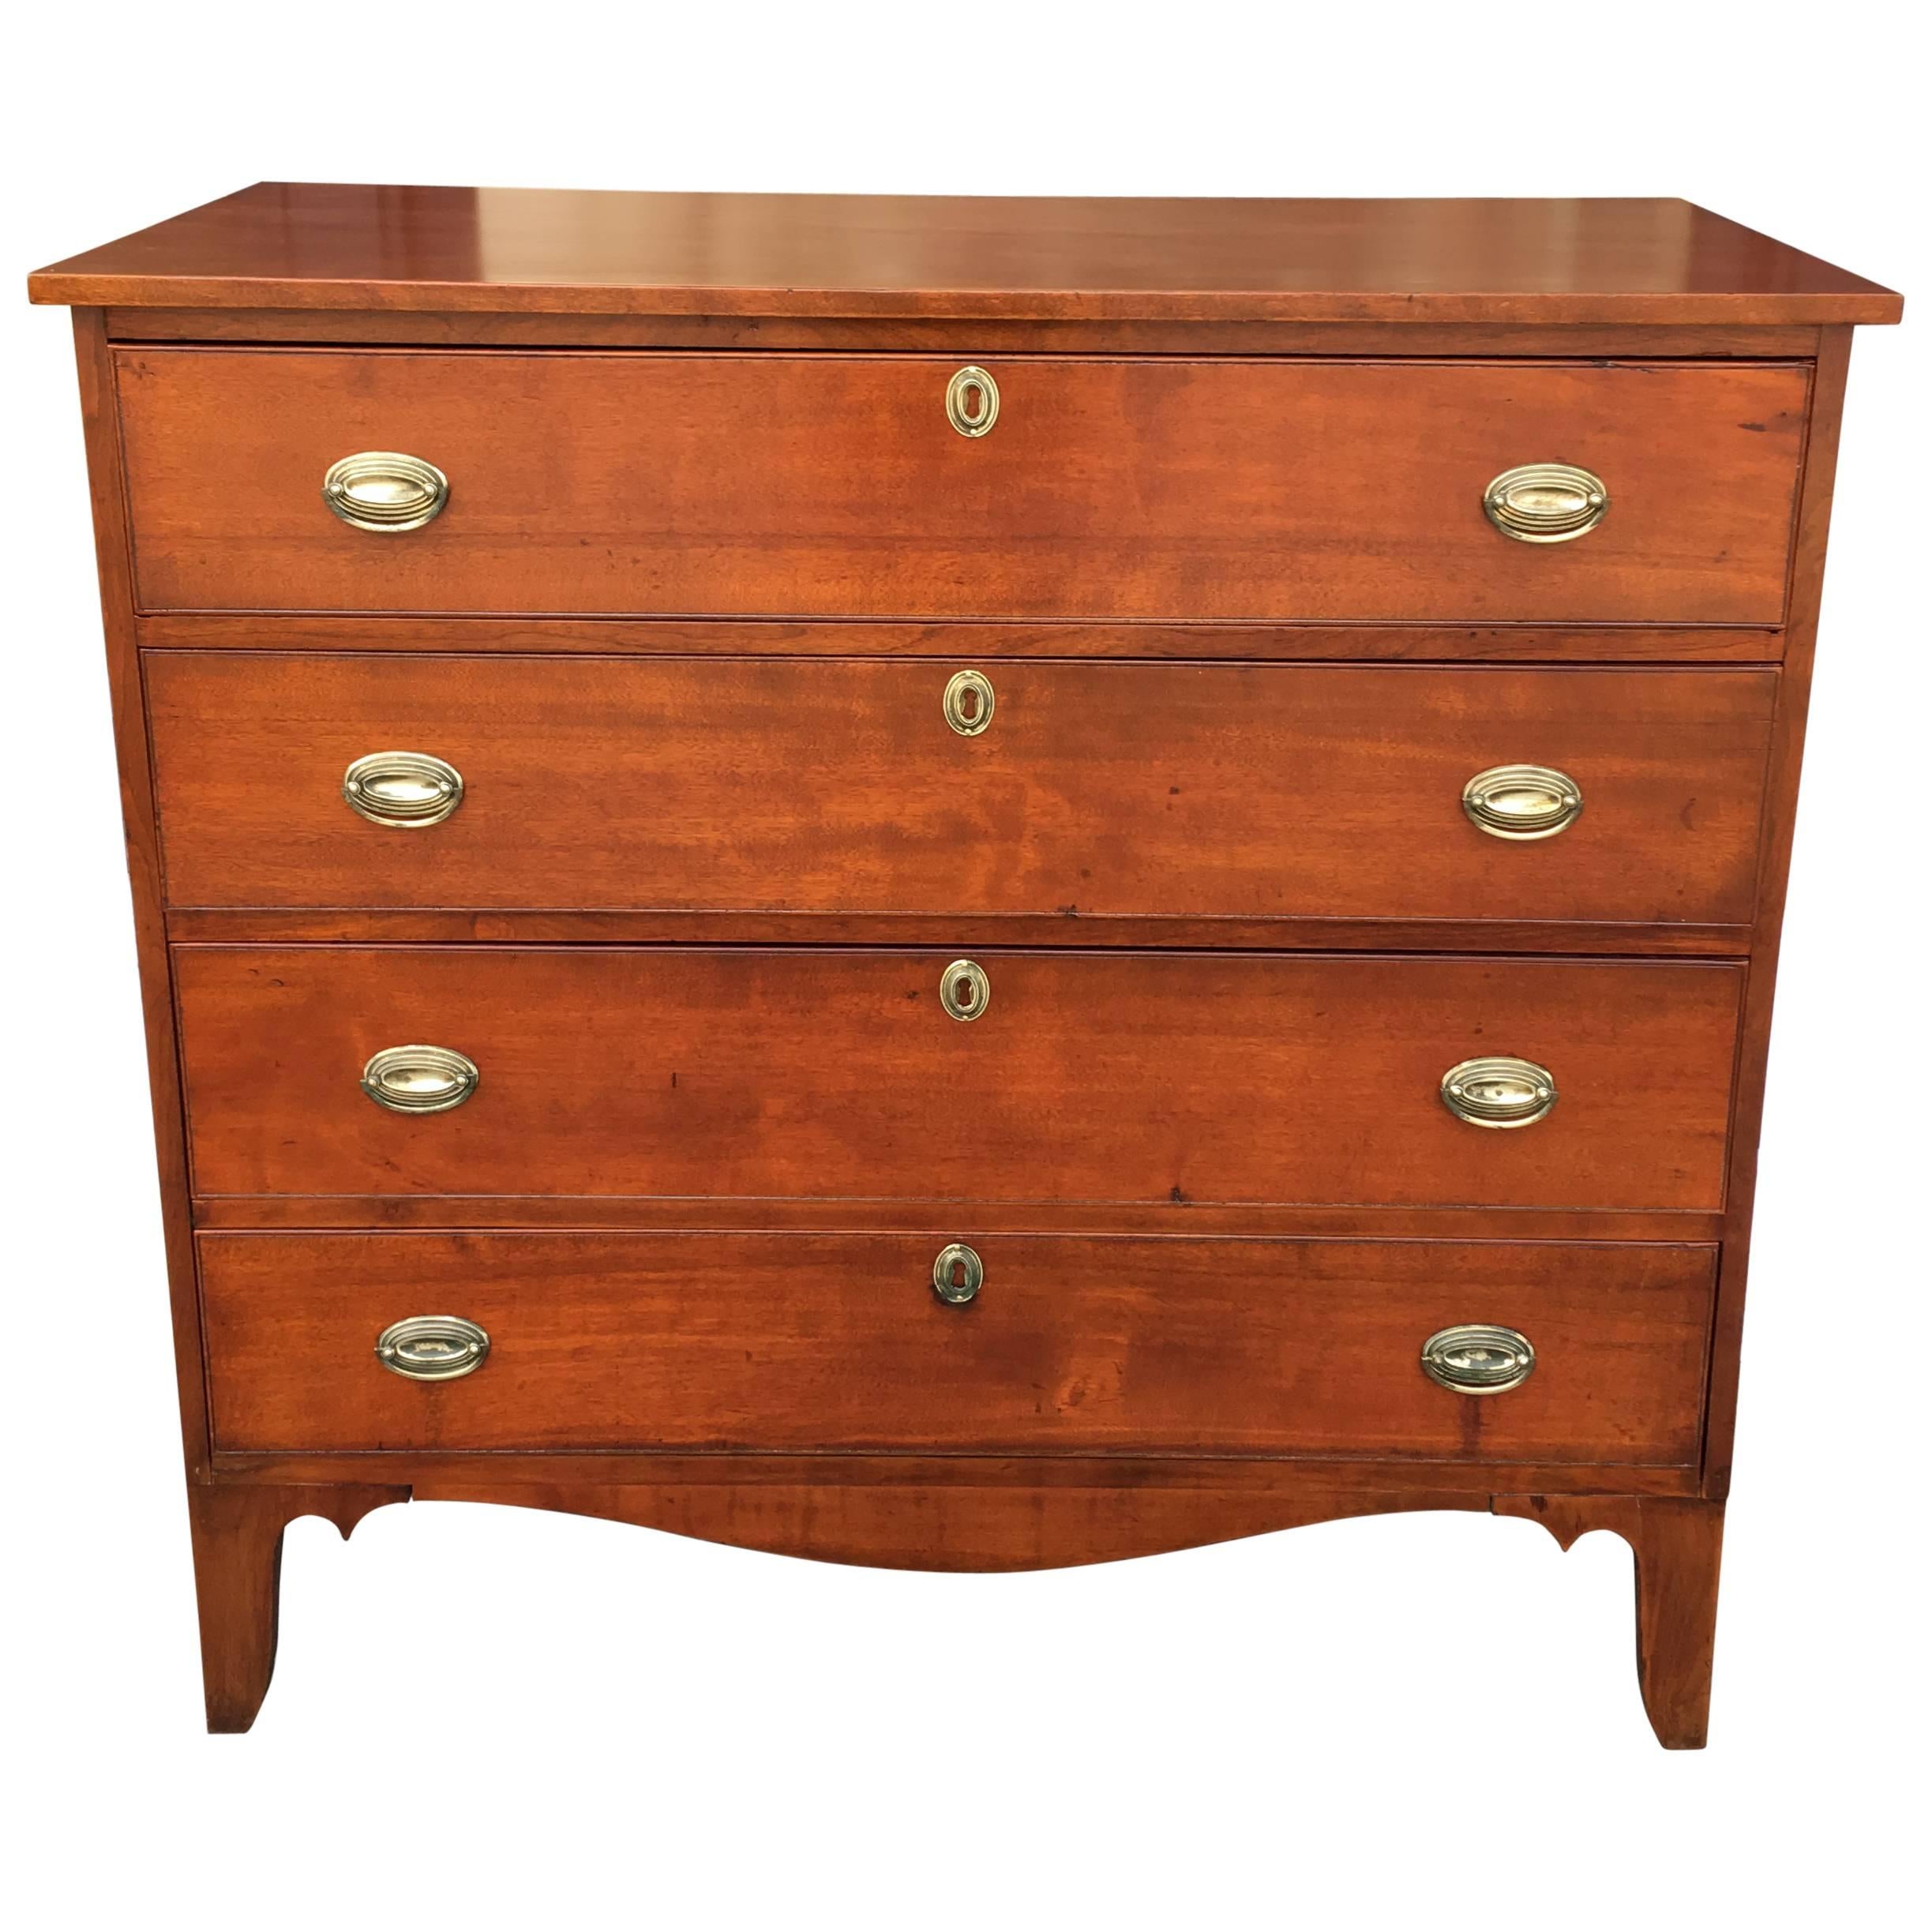 American Birch New England Chest Late 19th Century with Original Pulls